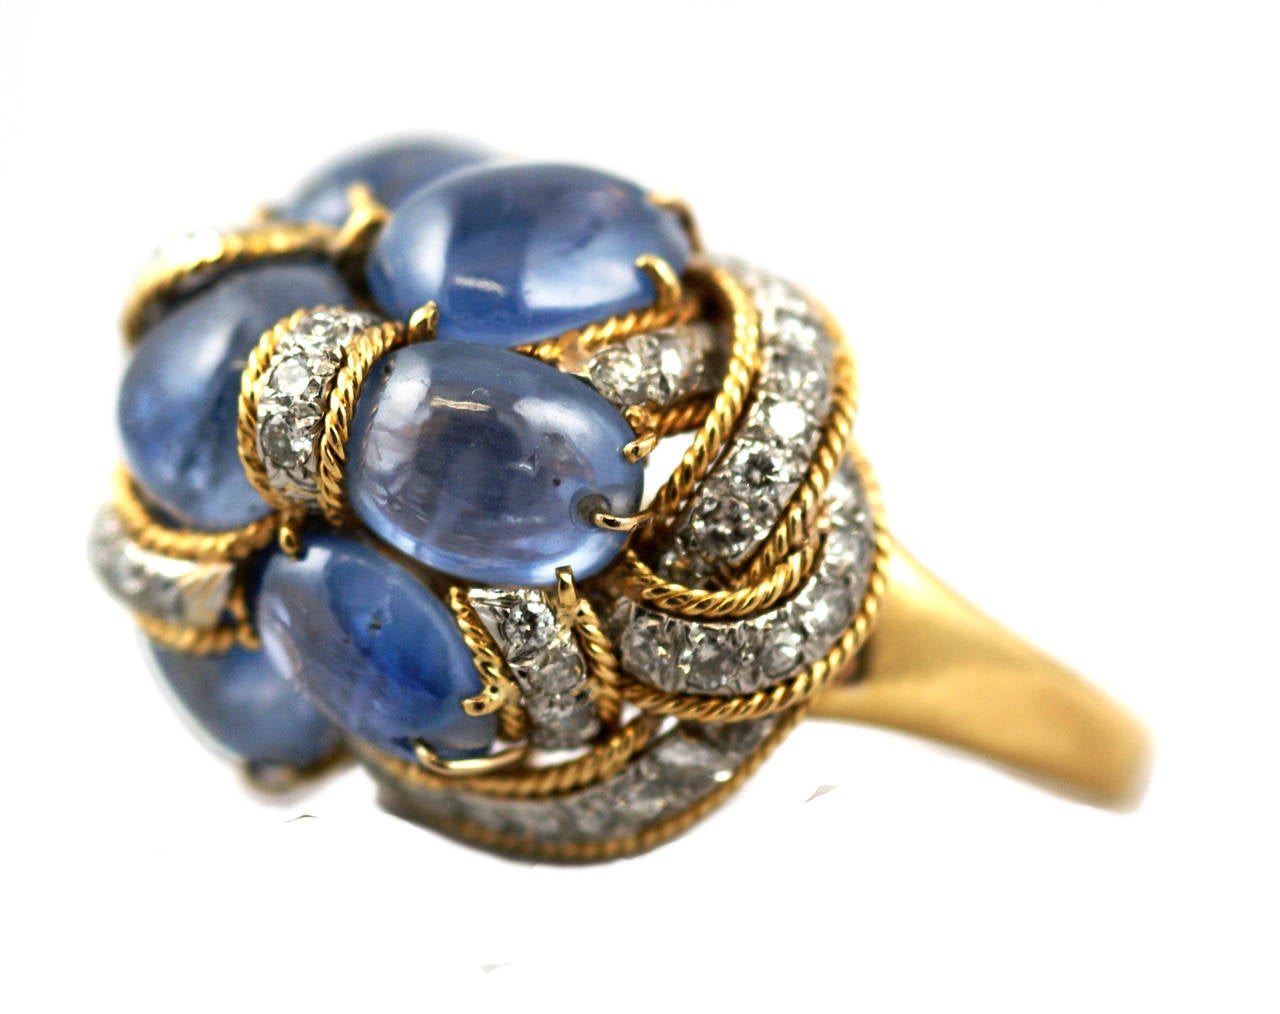 A fun cocktail ring designed as an 18kt yellow gold knot holding together an assemblage of blue cabochon sapphires, embellished by brilliant cut diamonds. Circa 1975.

Adjustable Ring Size